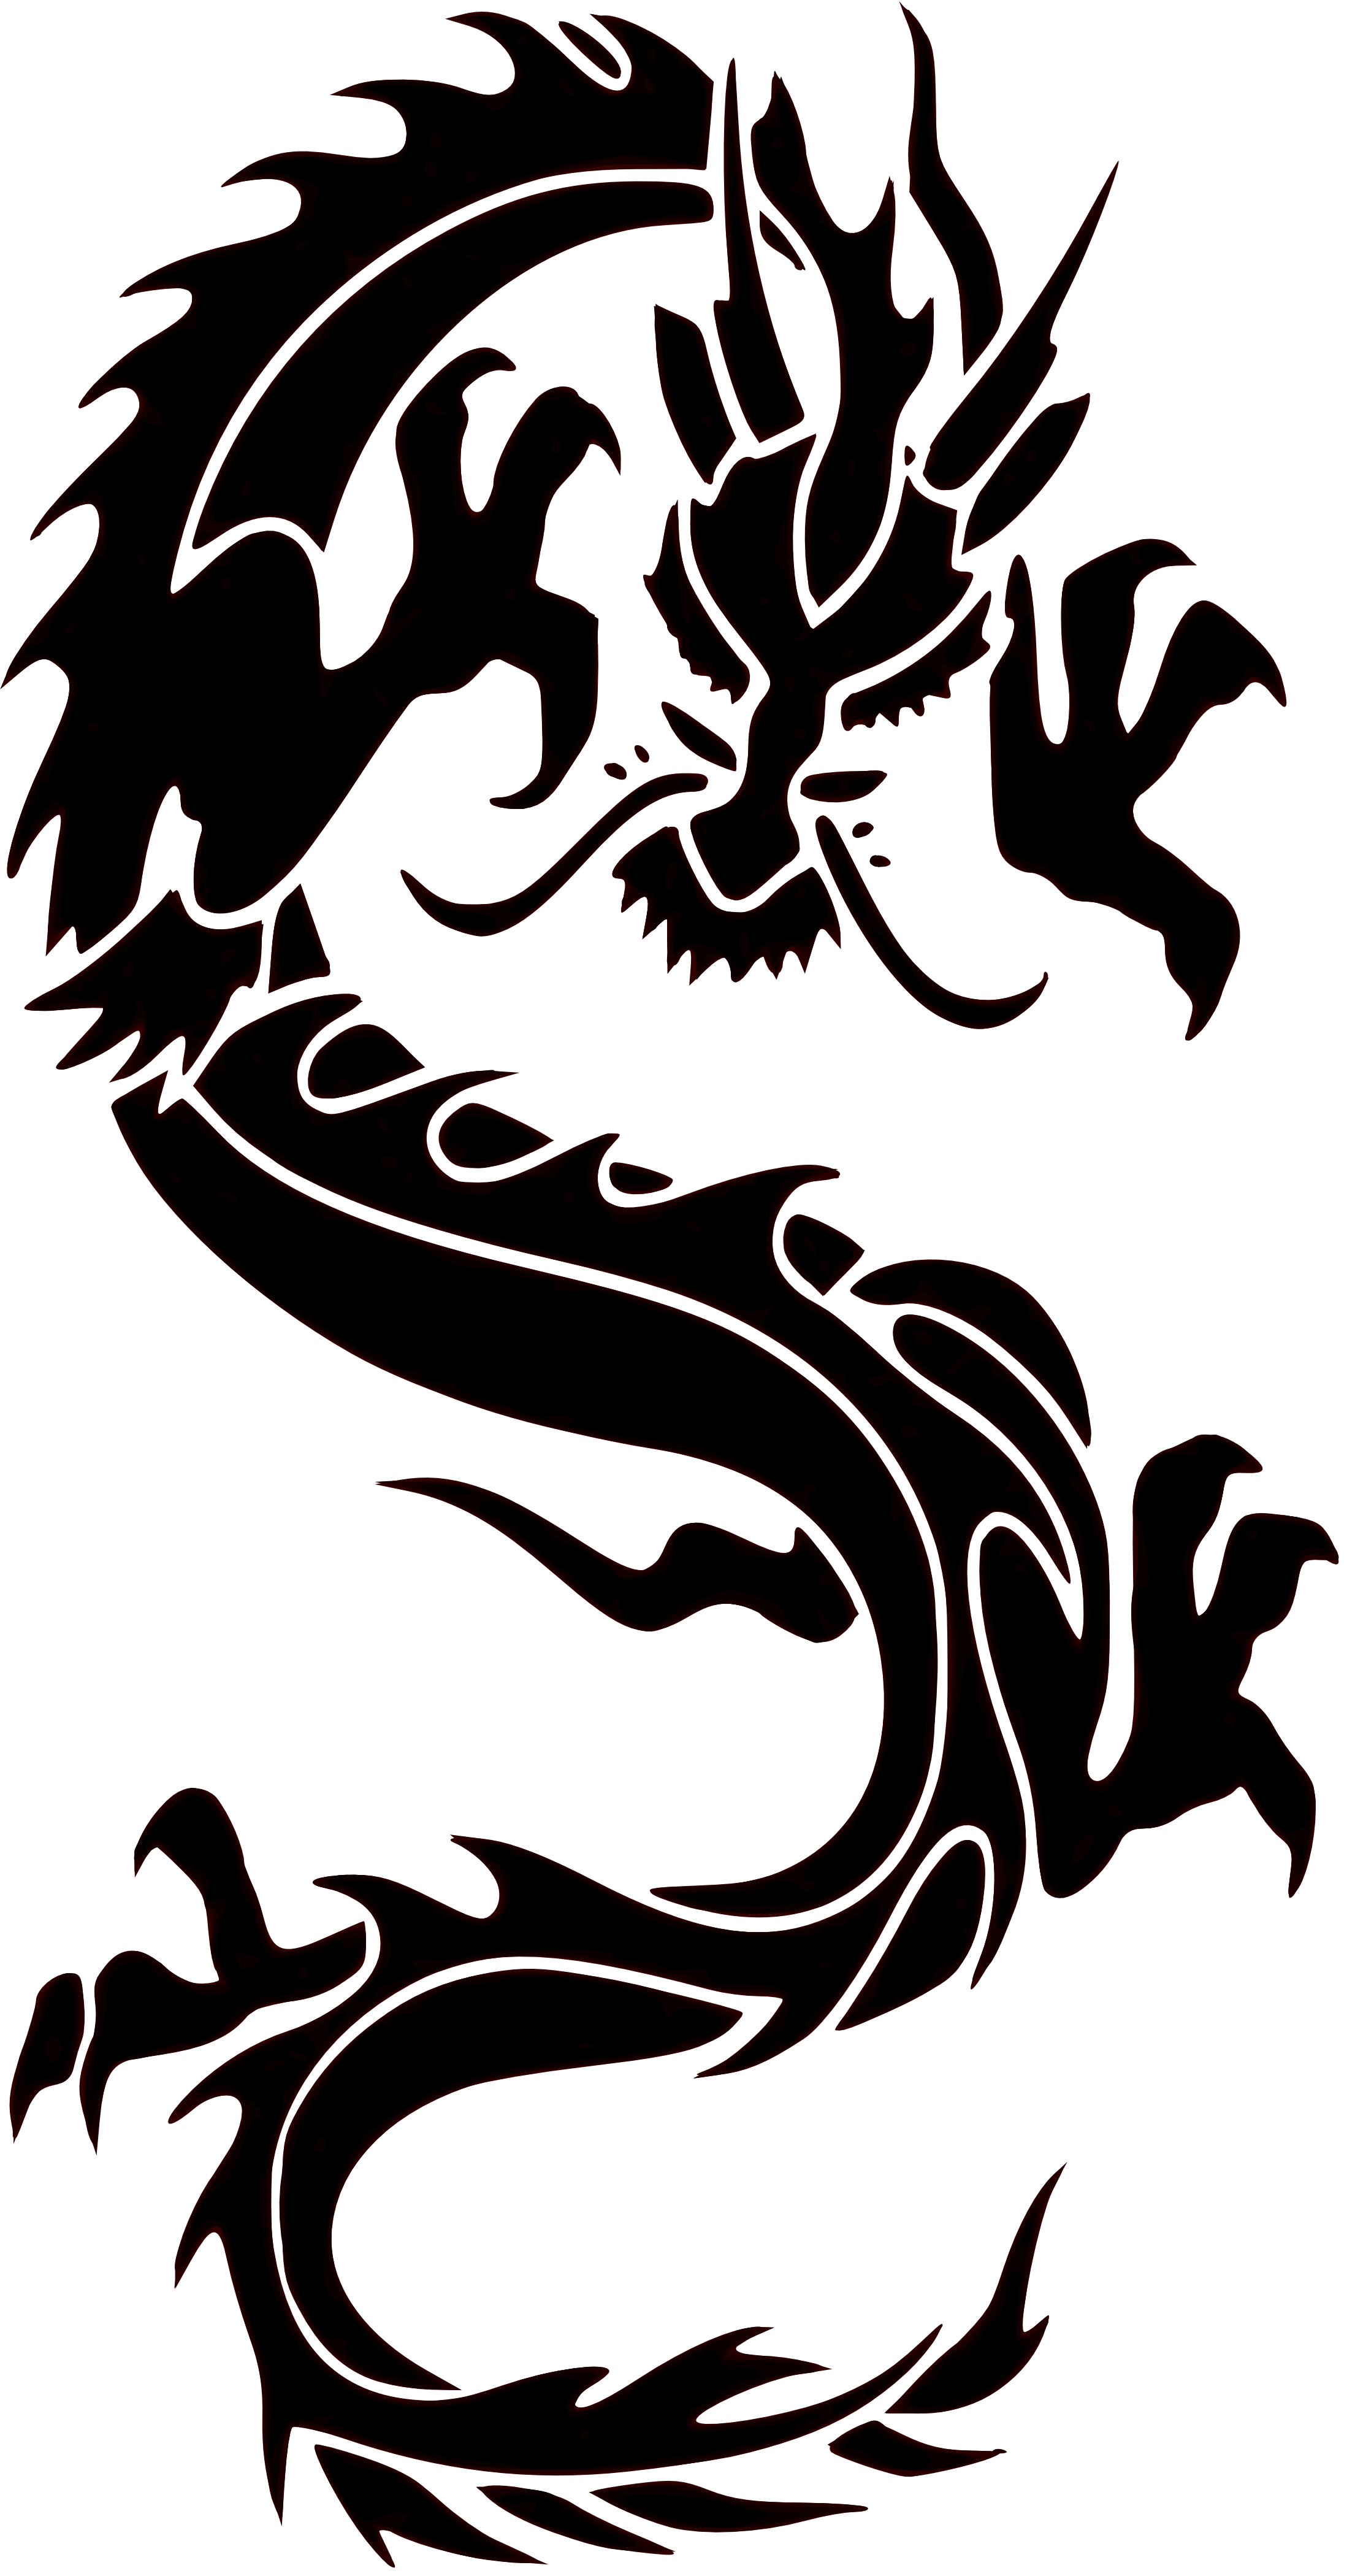 Chinese dragon images.